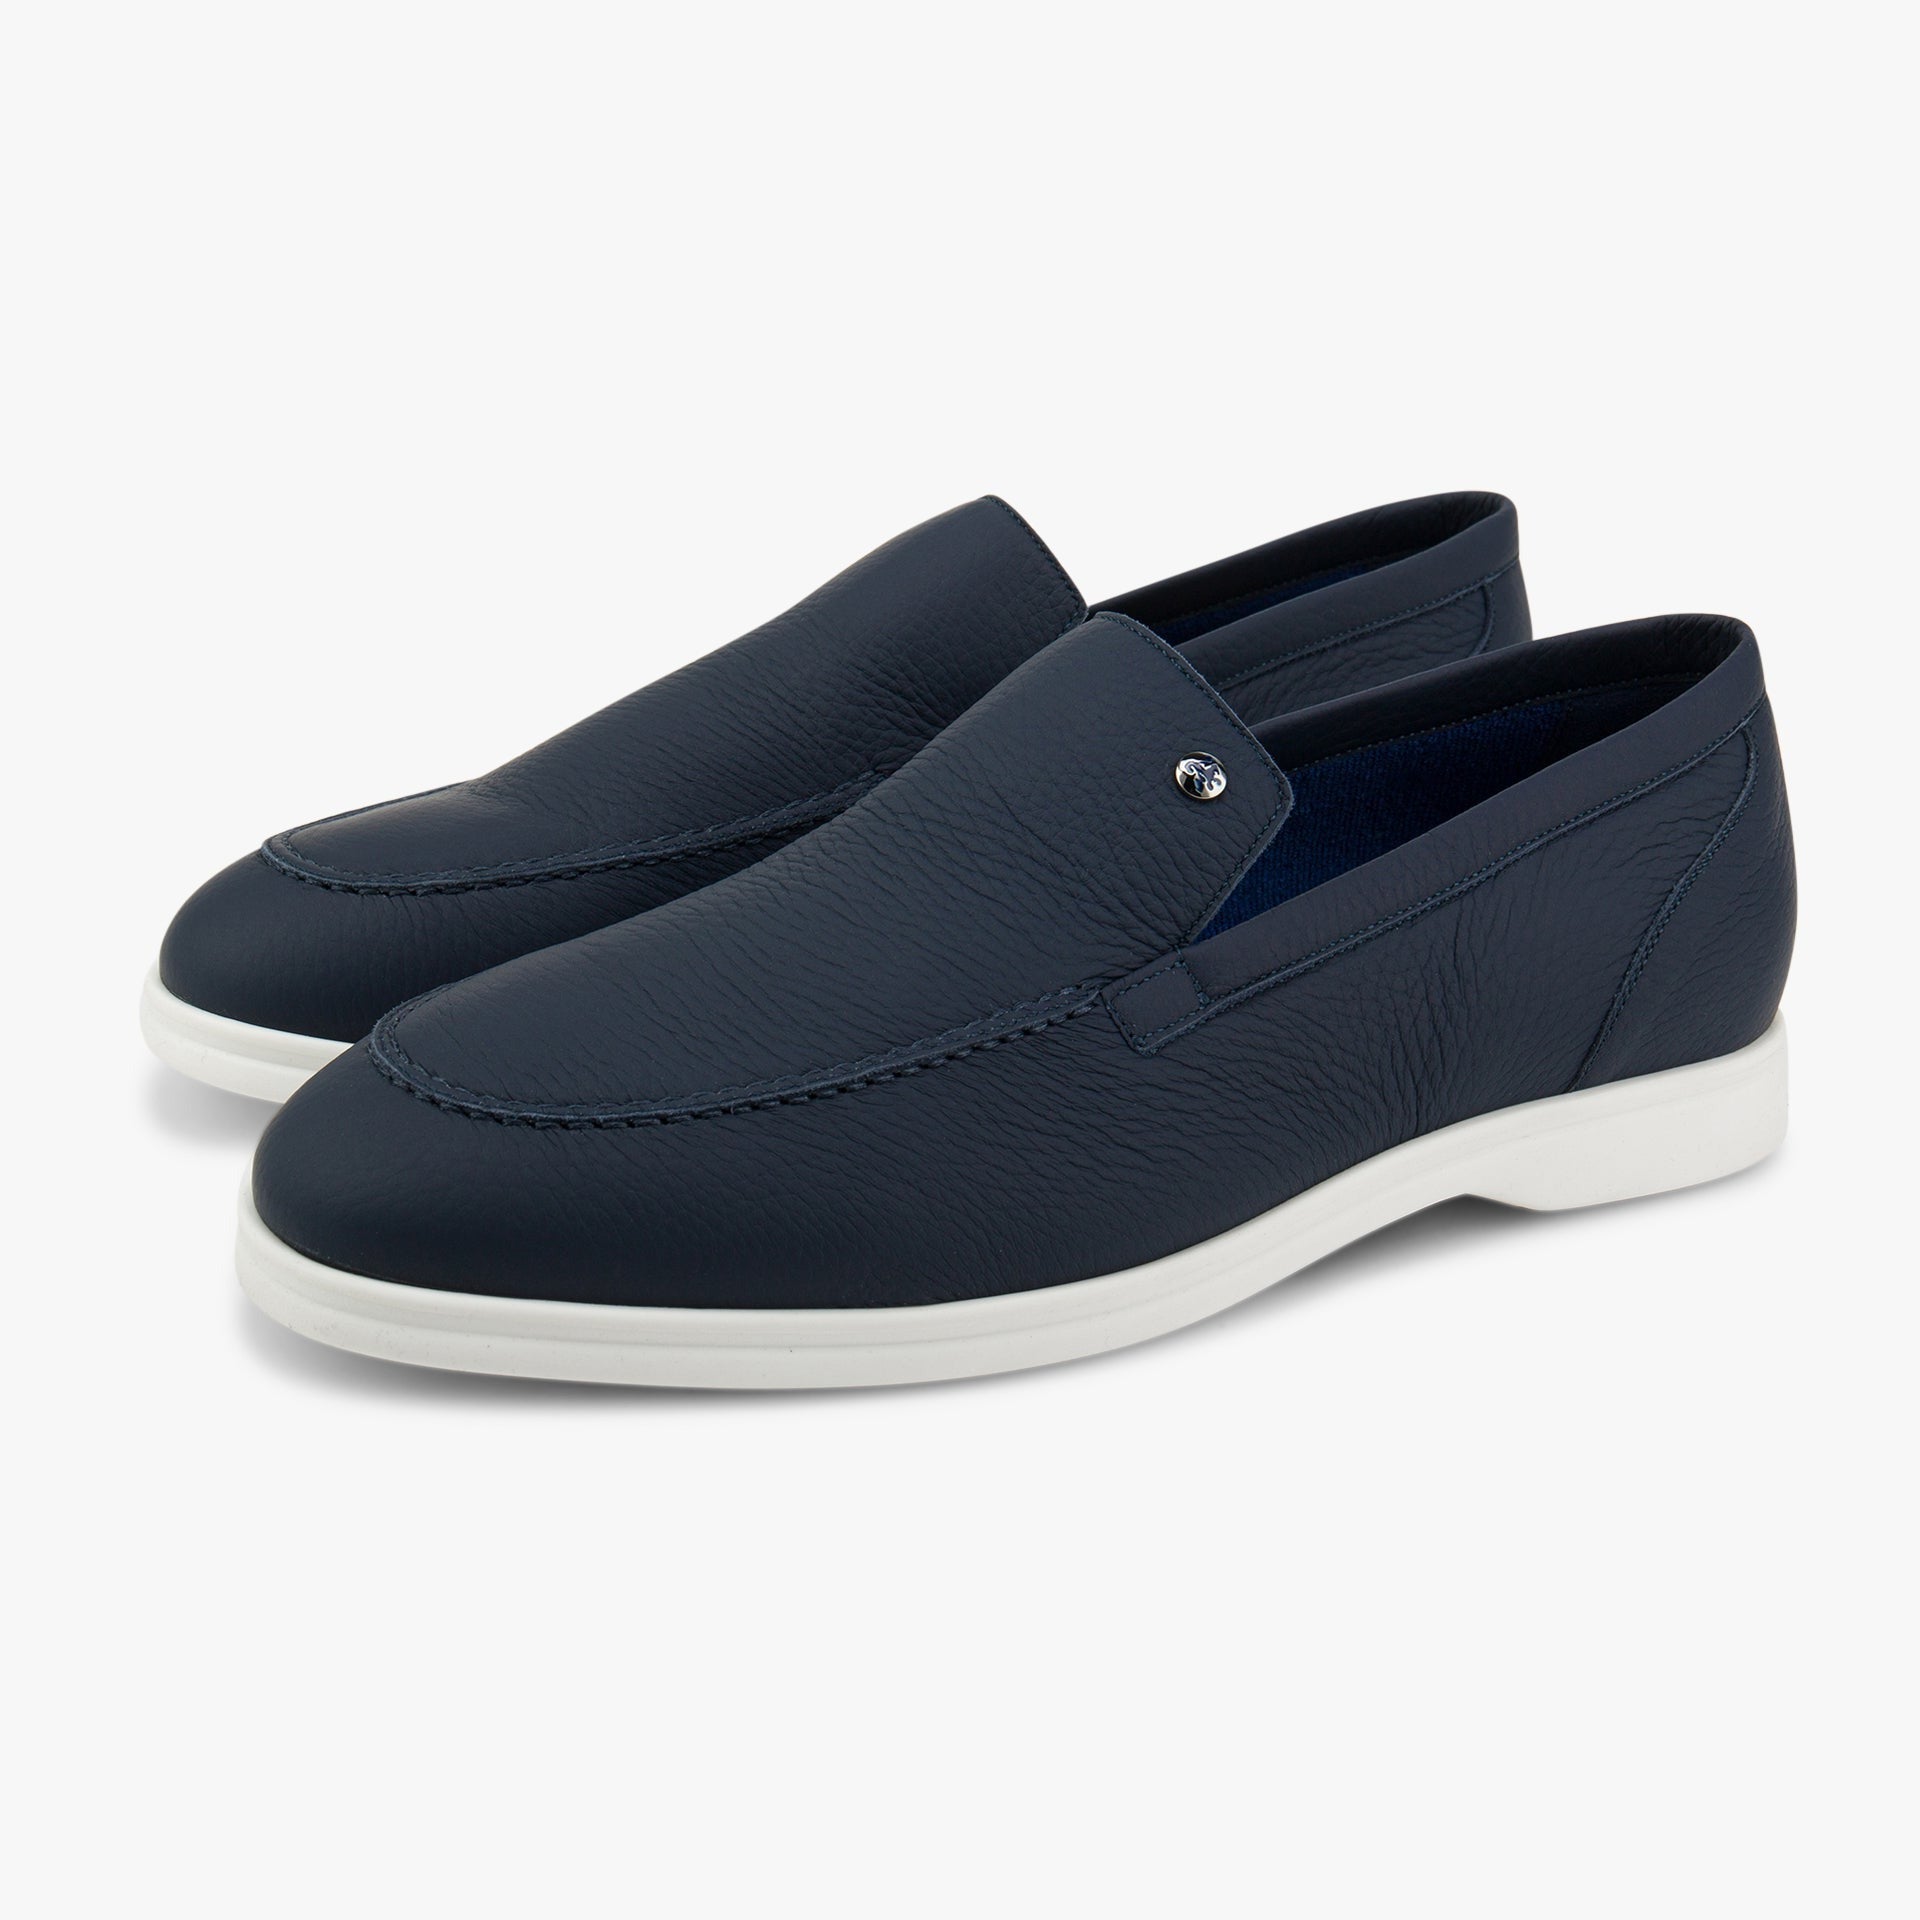 Zilli Premium Deerskin Leather Slip-Ons with Ruthenium-Finished Rivet